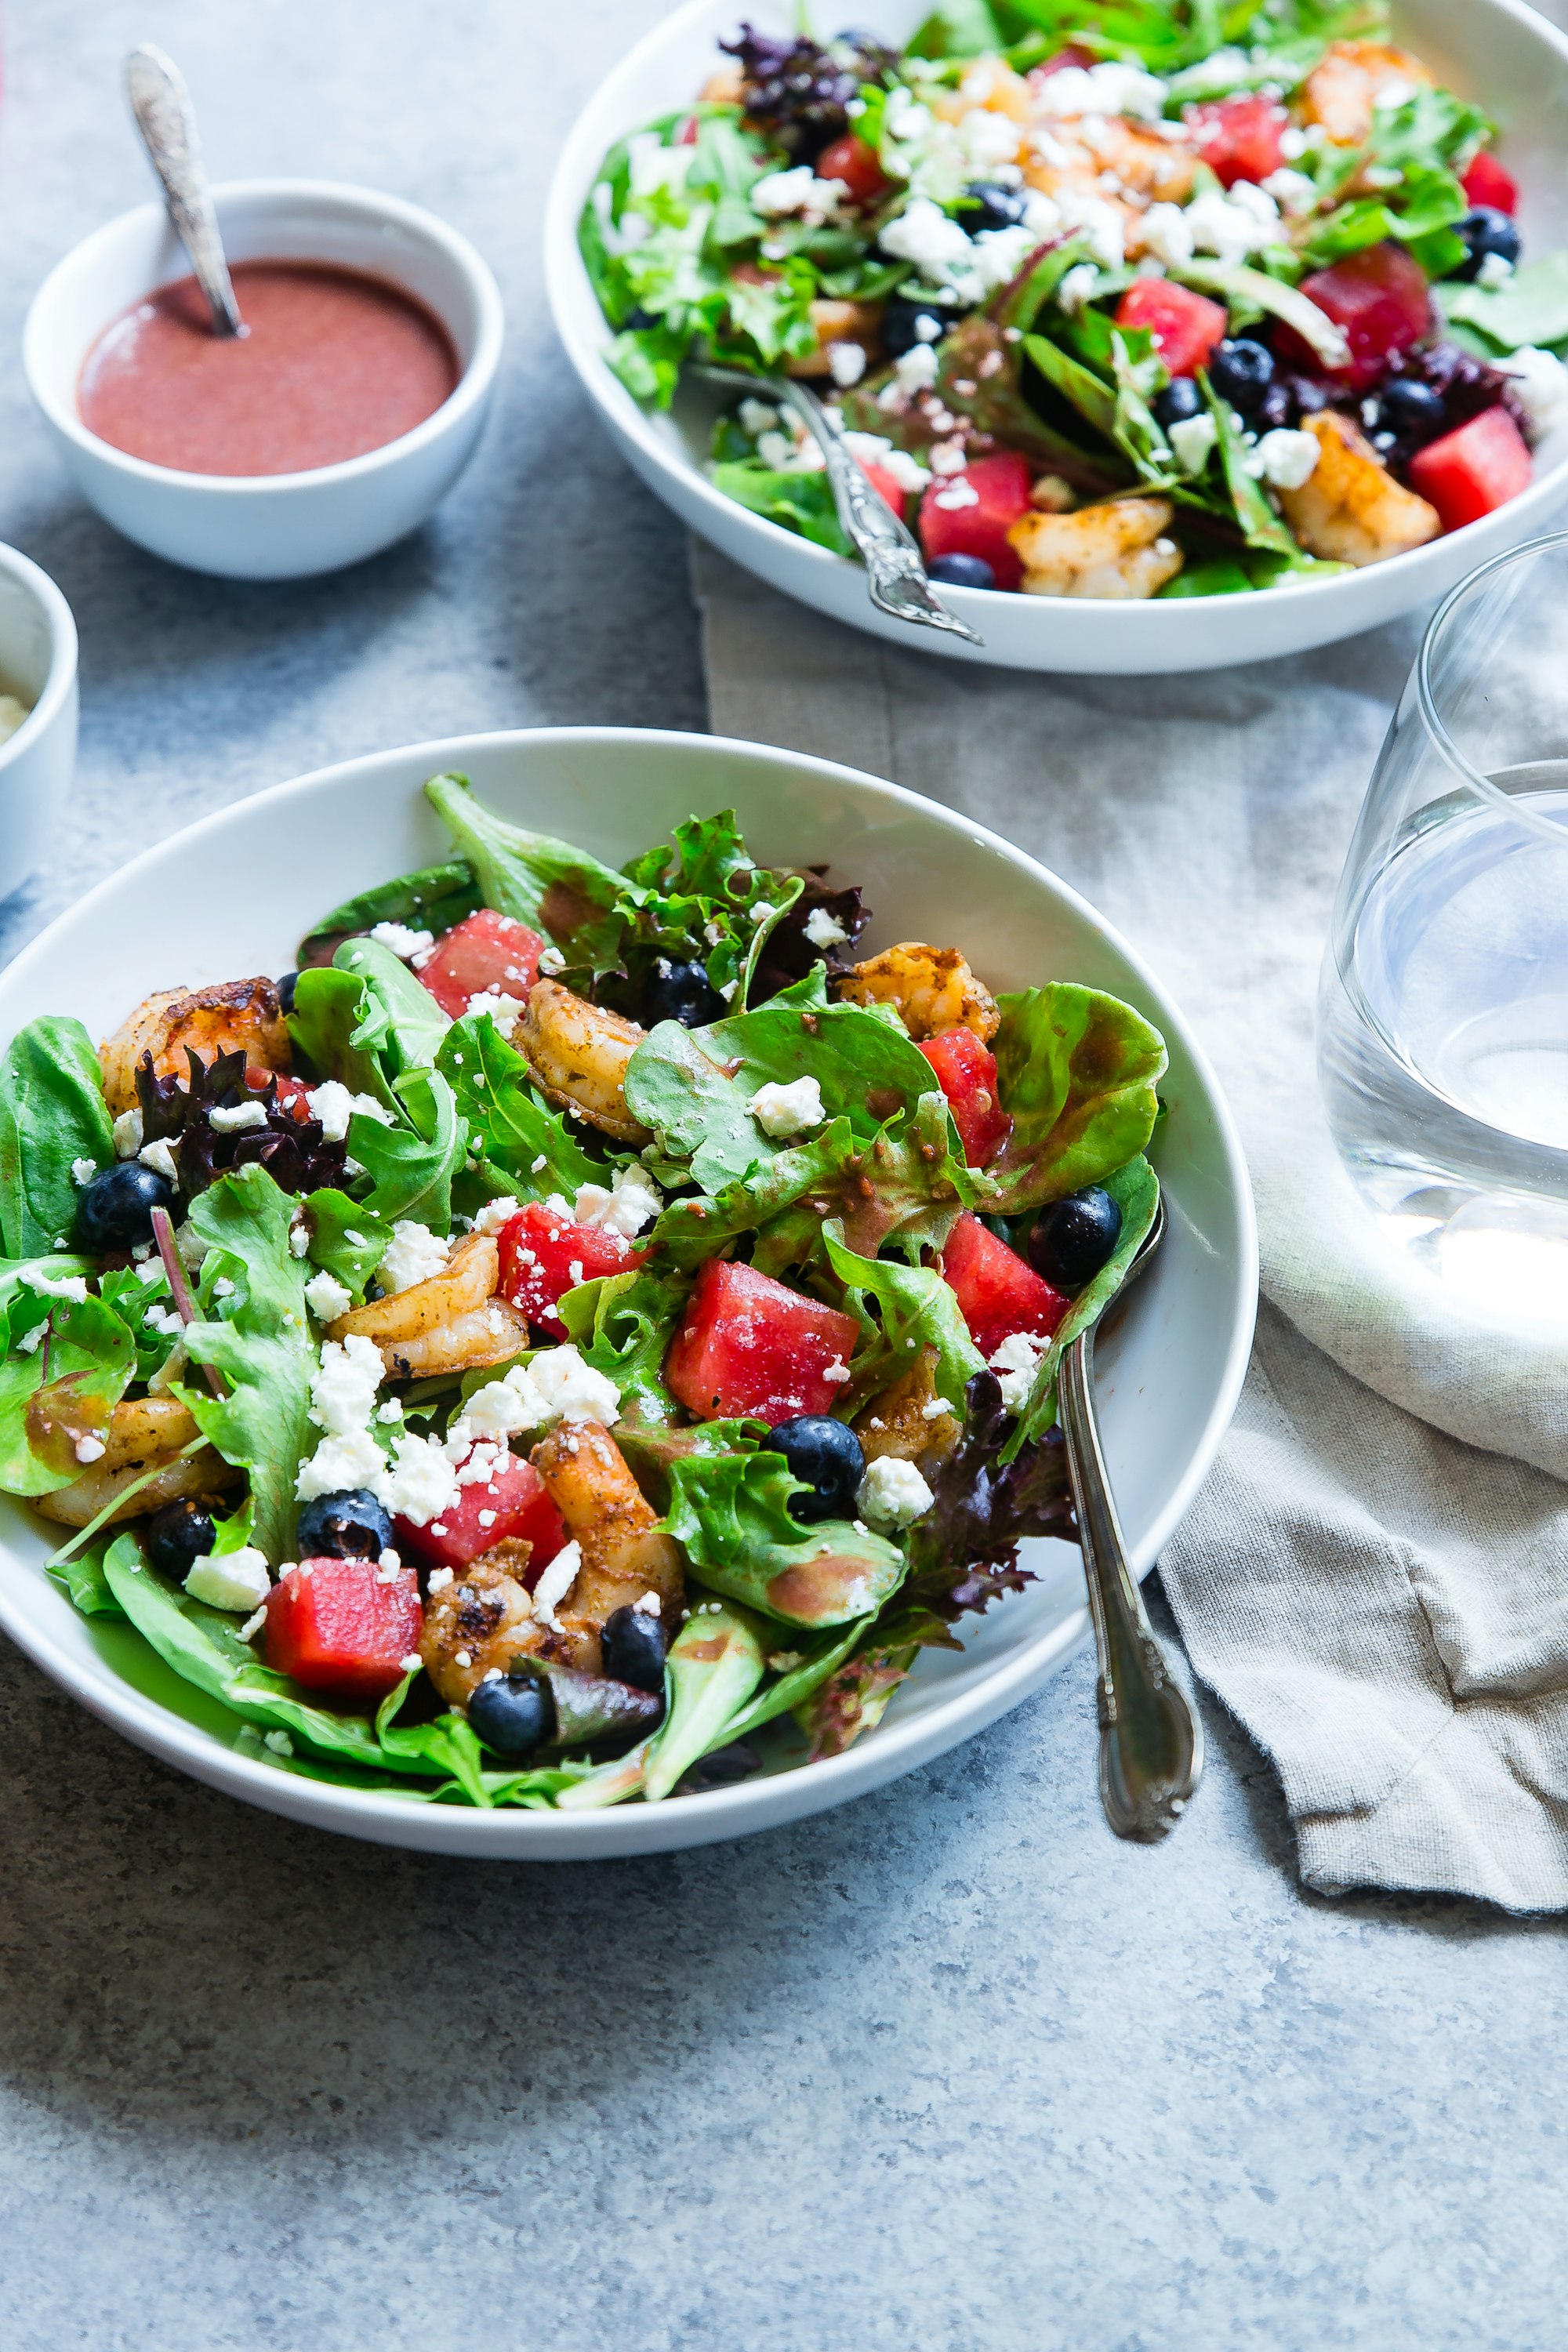 How Sweetgreen Launched its Summer Rewards Program